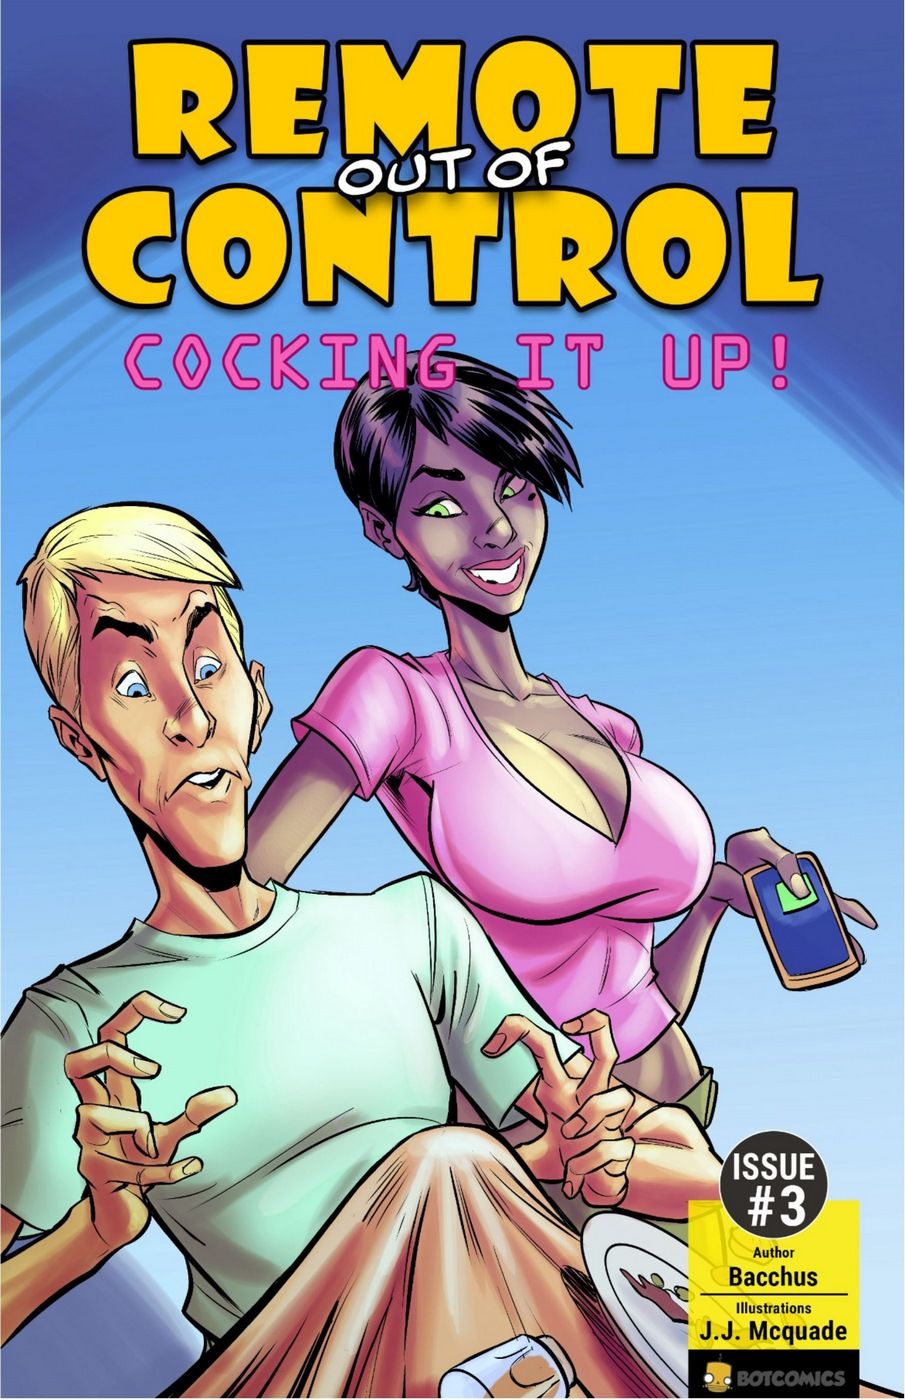 Remote out of Control Cocking it Up - Issue 3 (Bot Comics) page 1